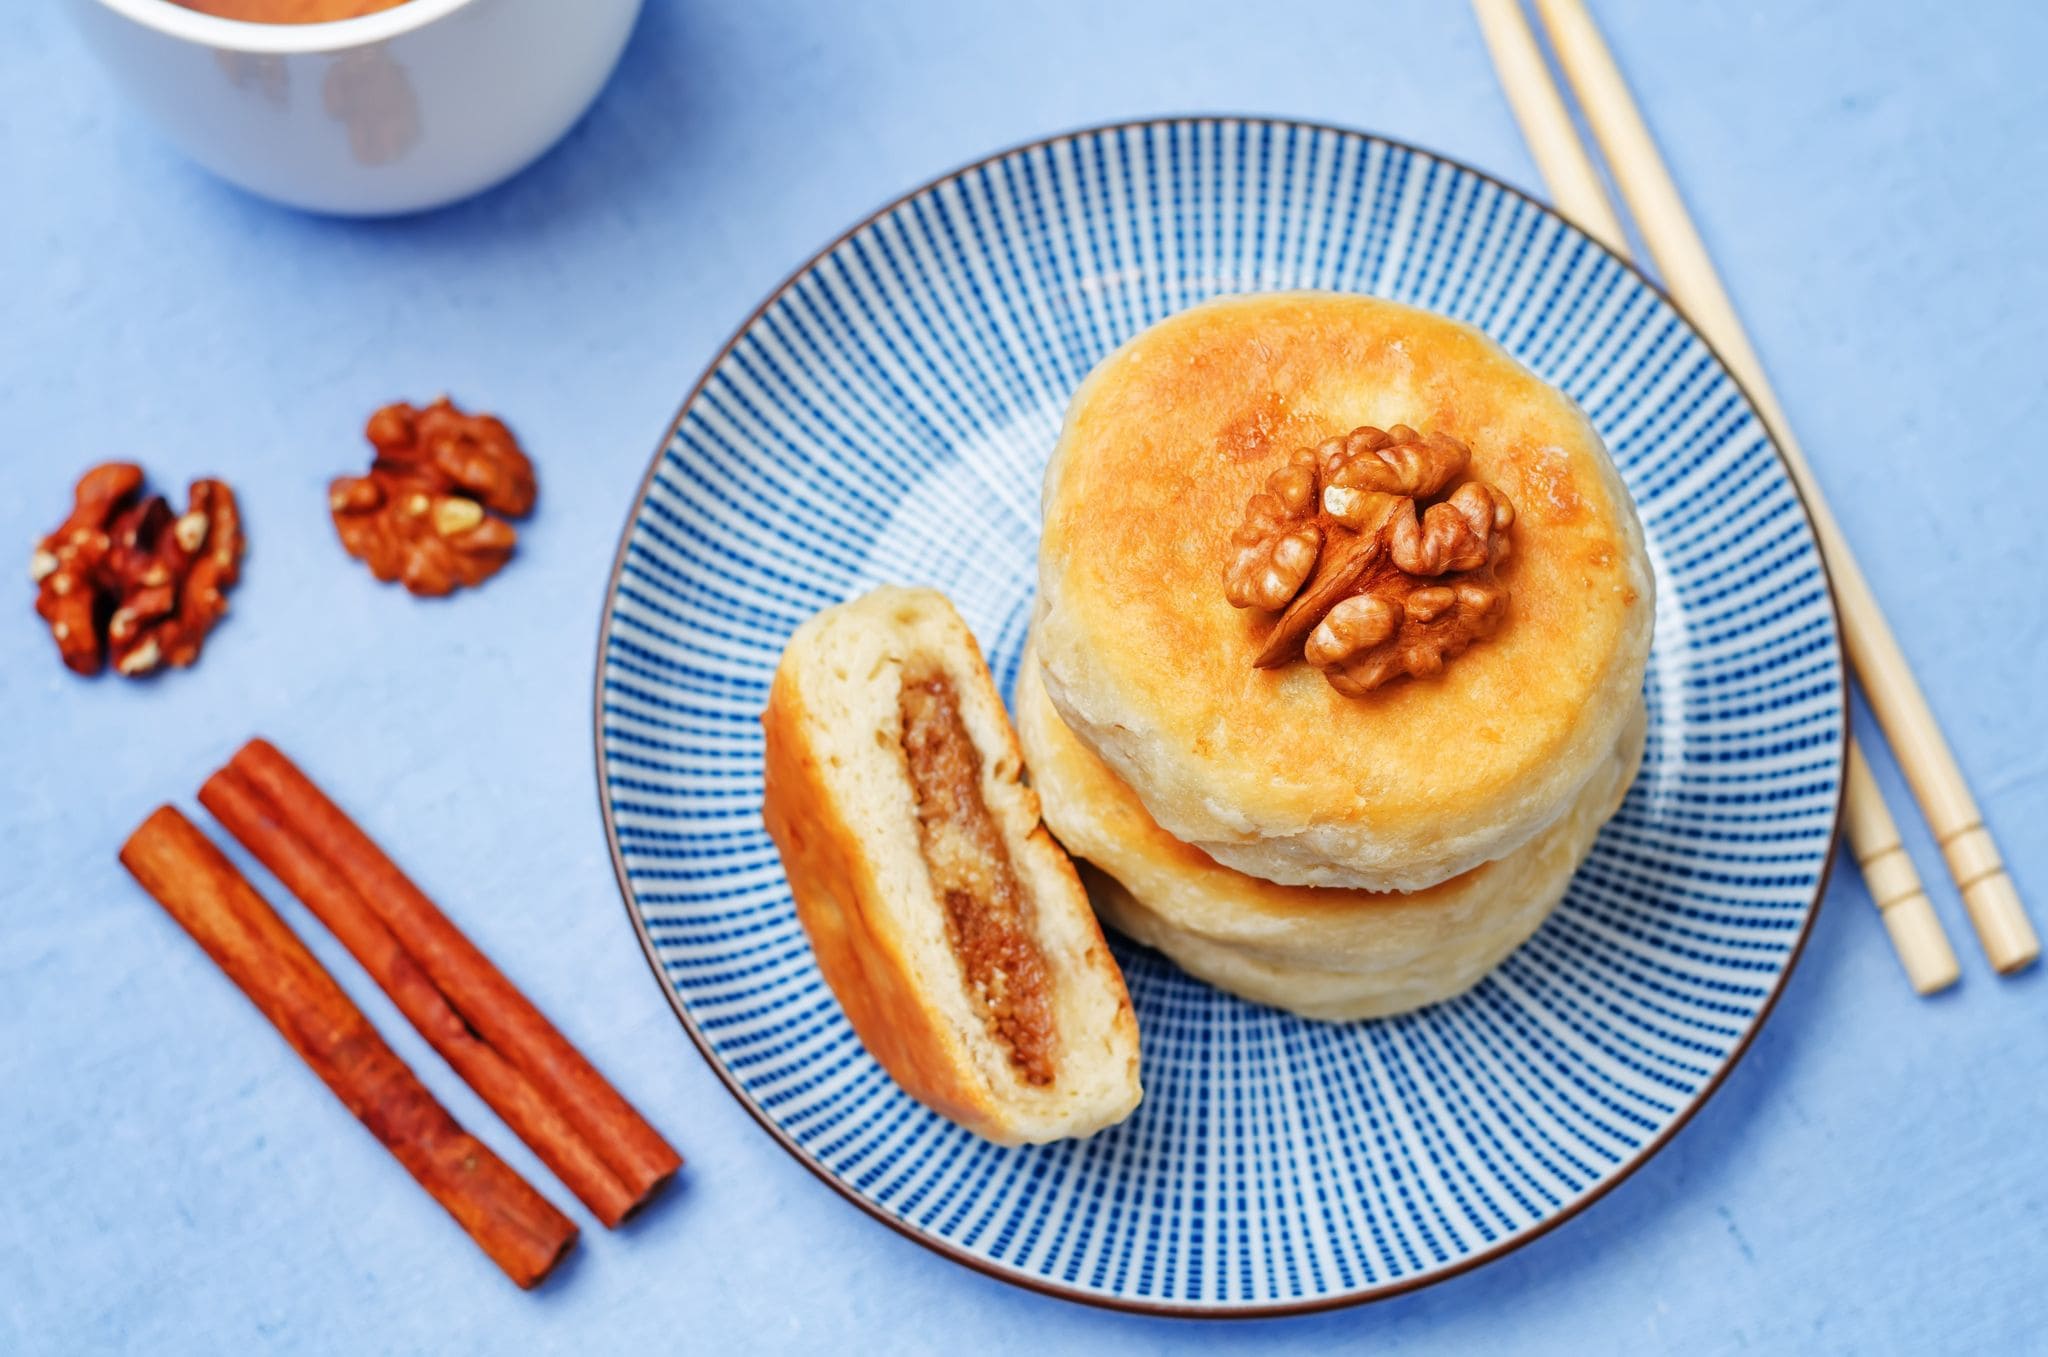 Which of these are Korea’s version of pancakes and also a popular street food?